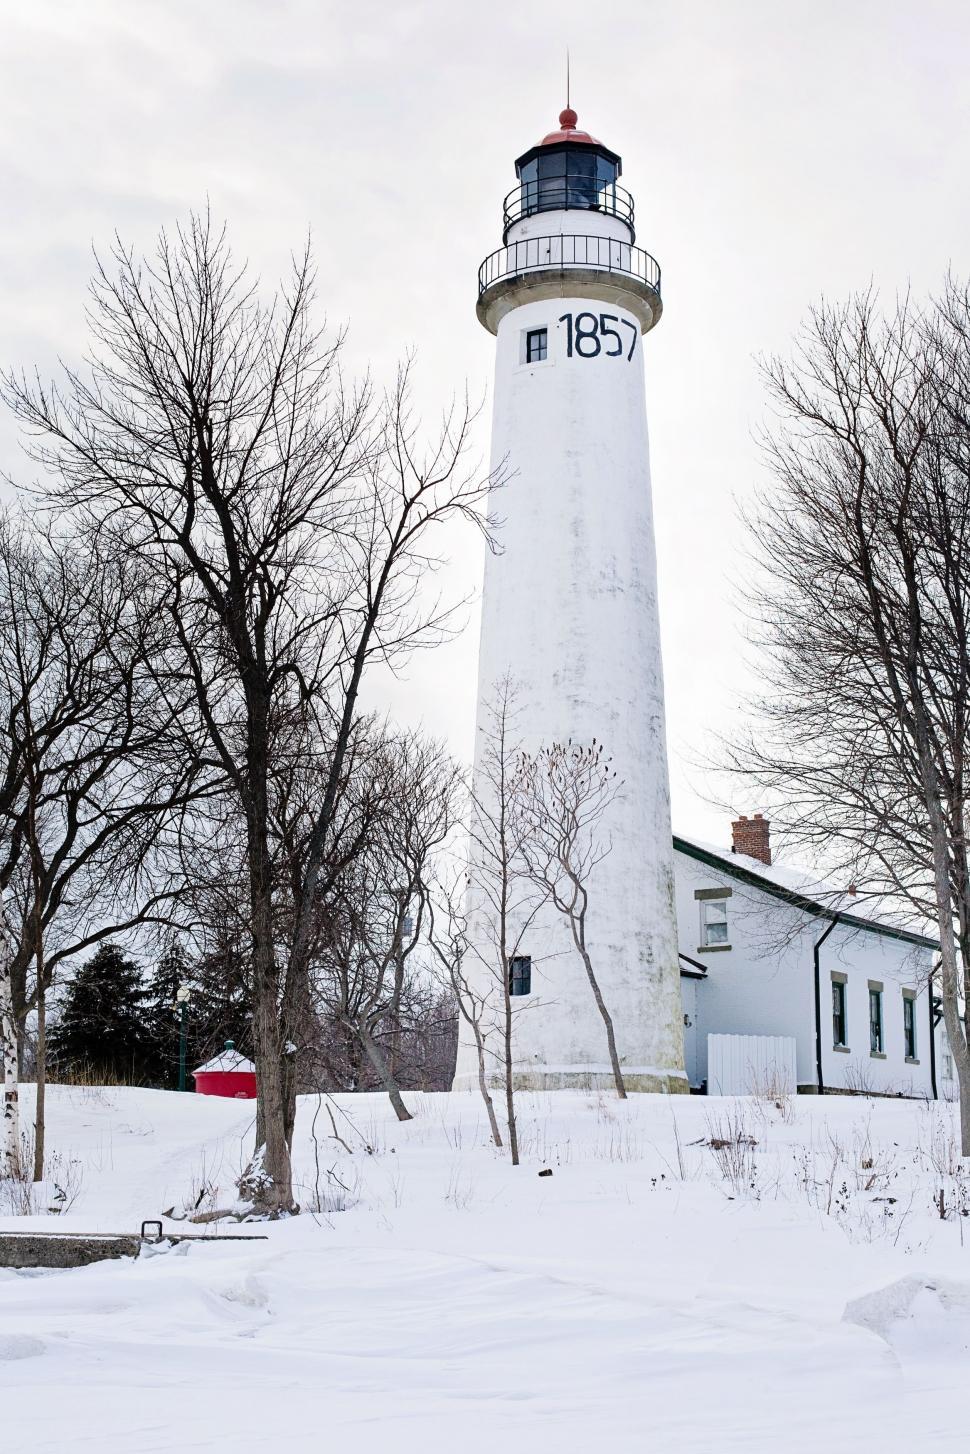 Free Image of Lighthouse and leafless trees in snow  